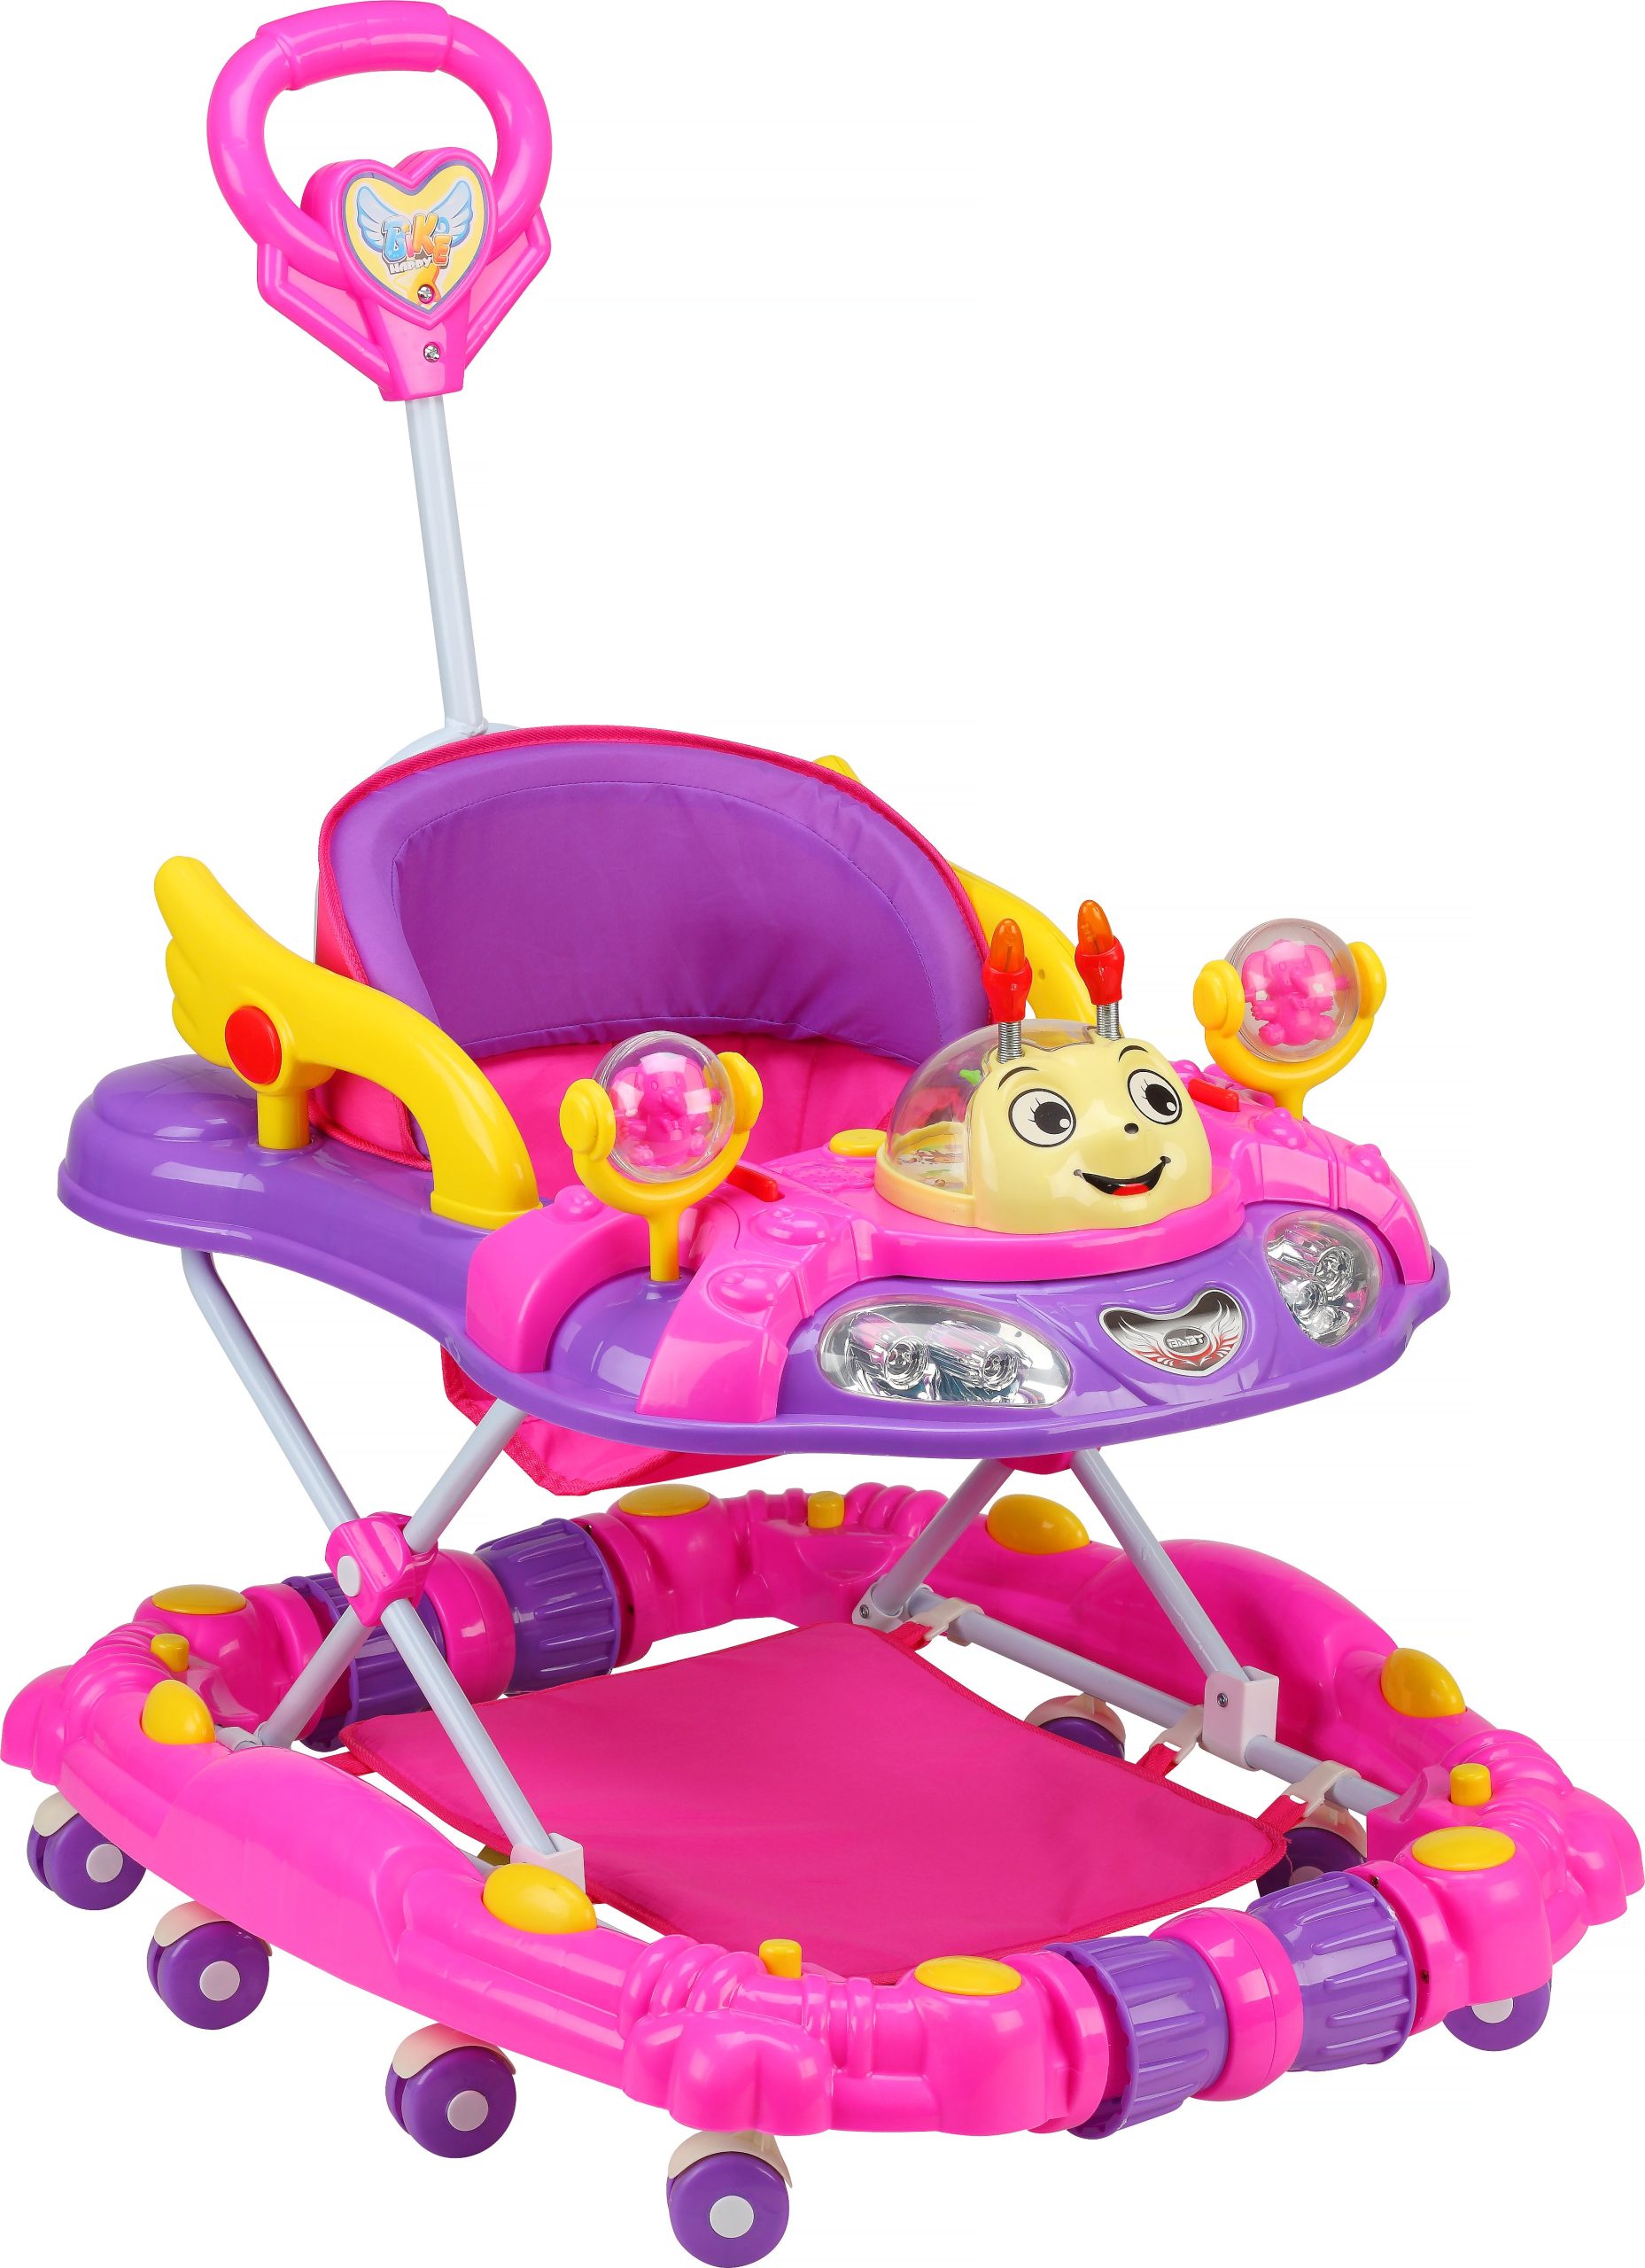 2-in-1 Baby Walker With Push Bar - Car Shape